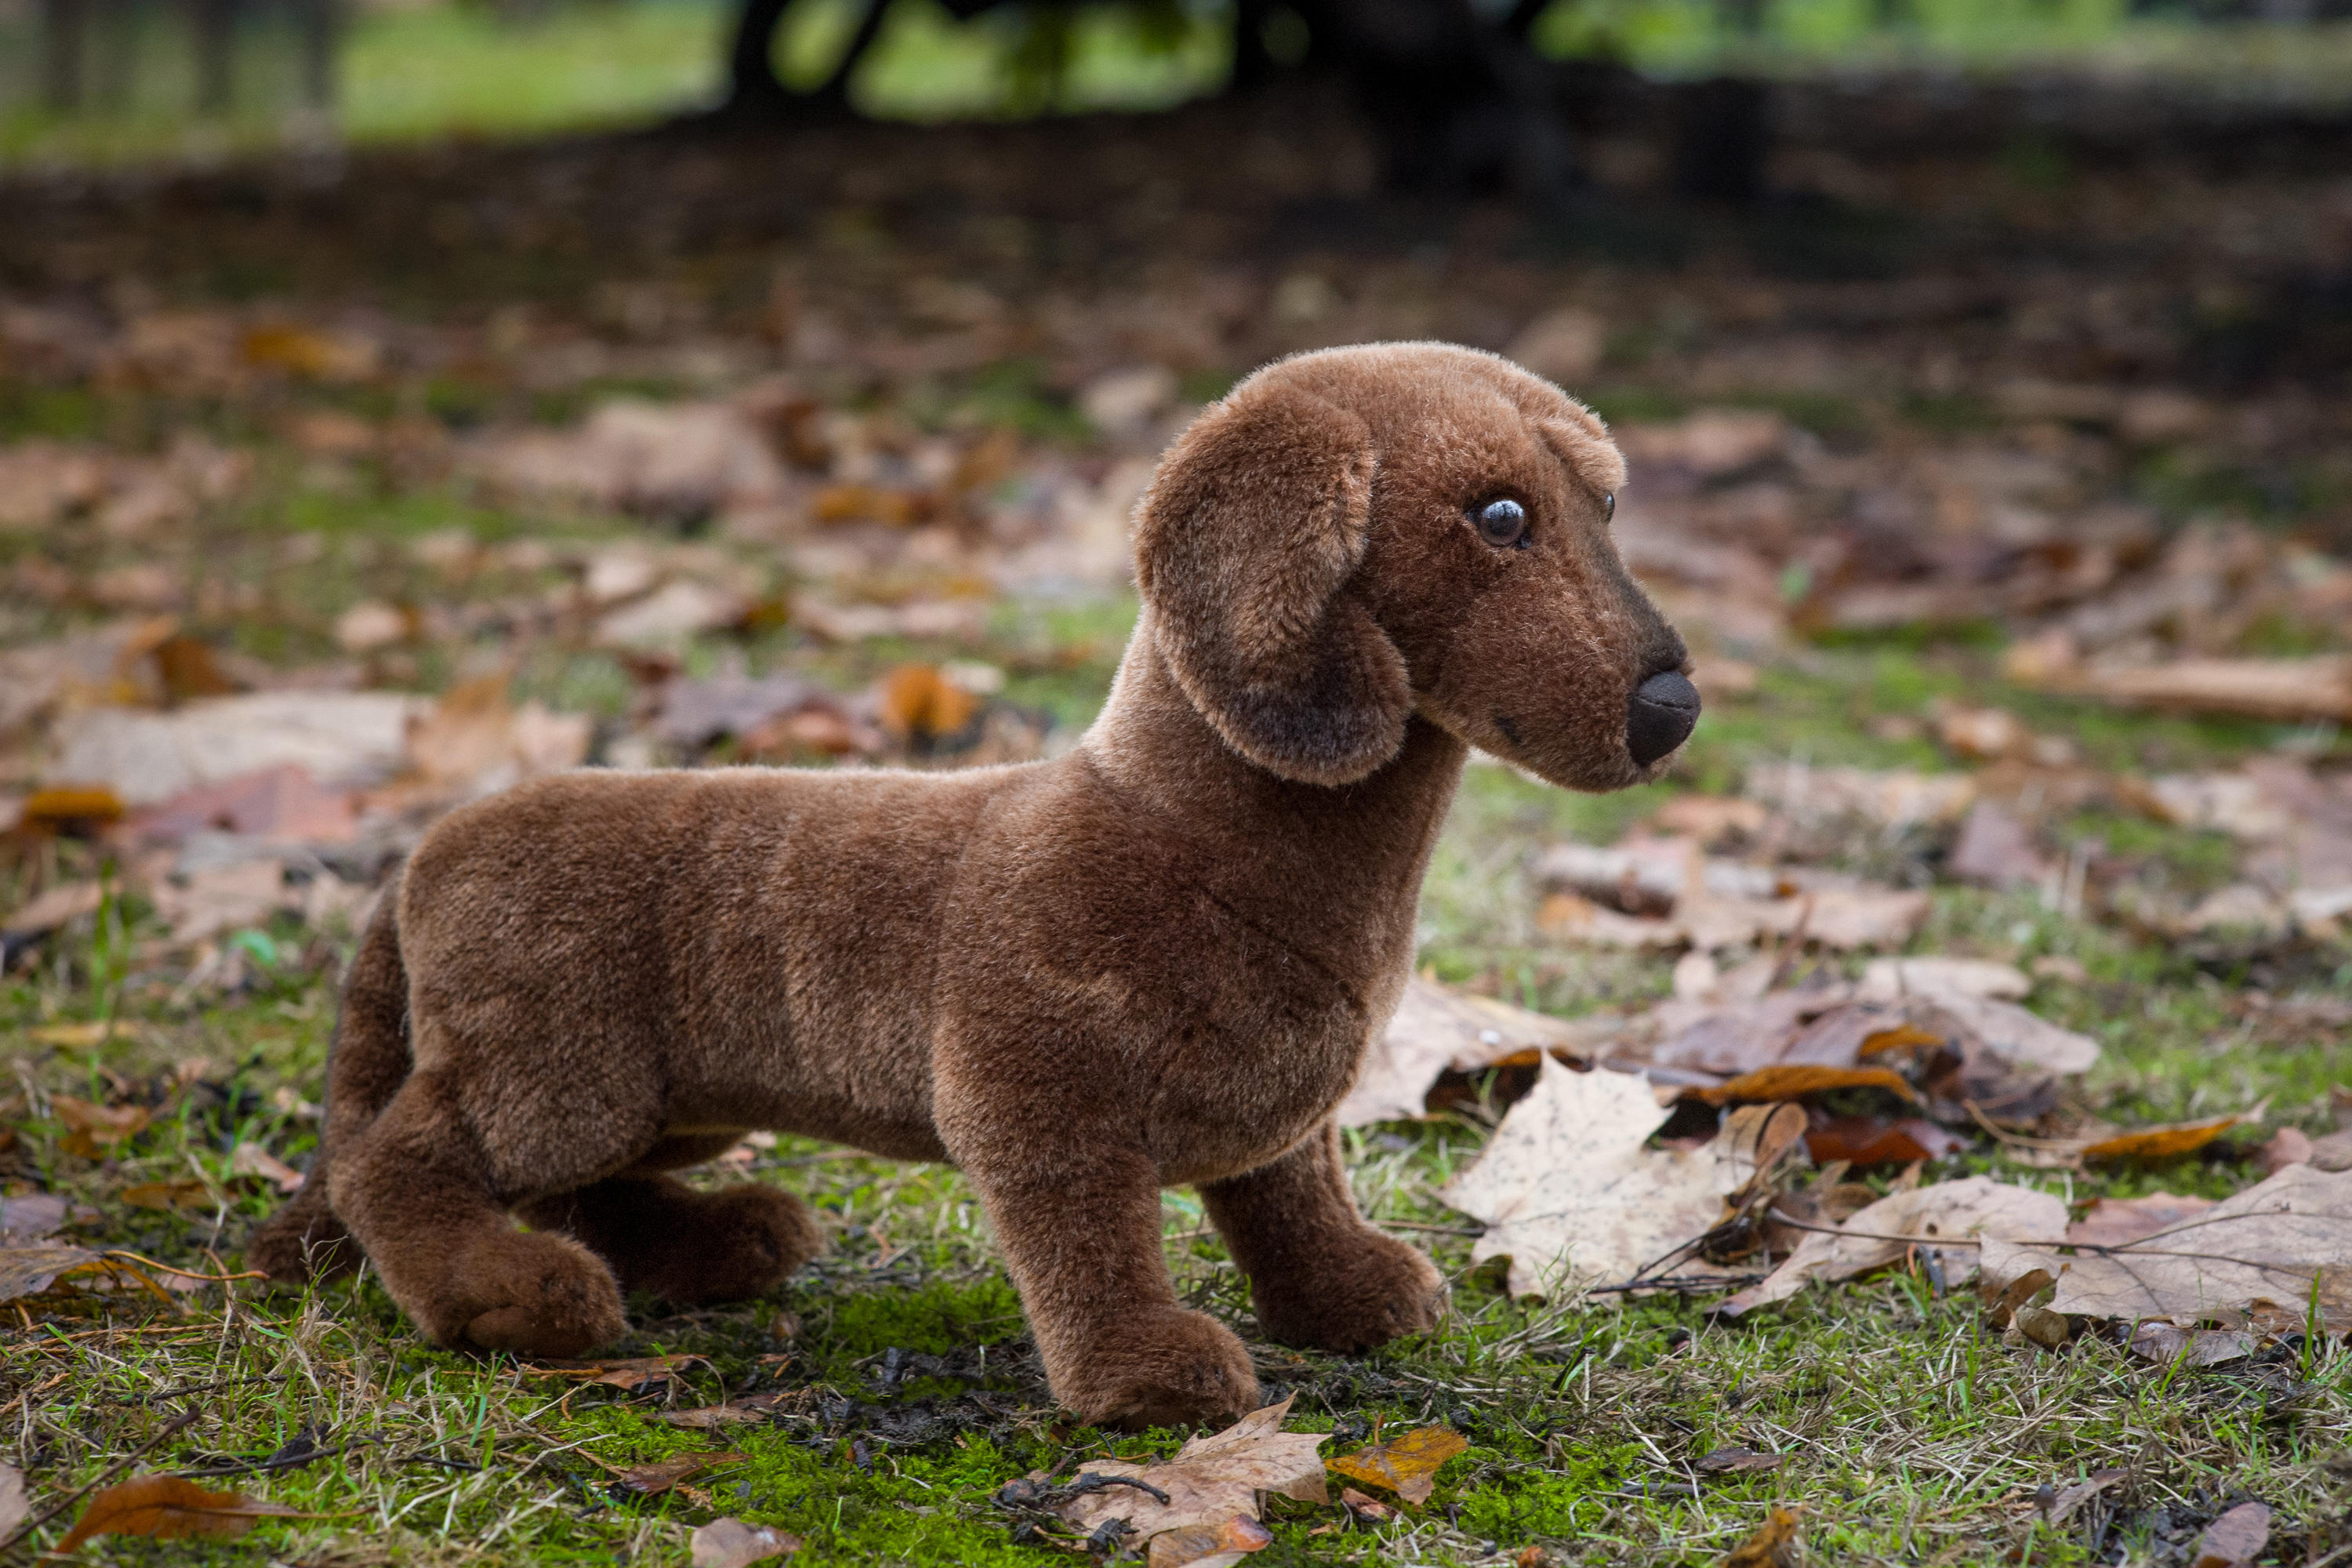 smooth haired miniature dachshund